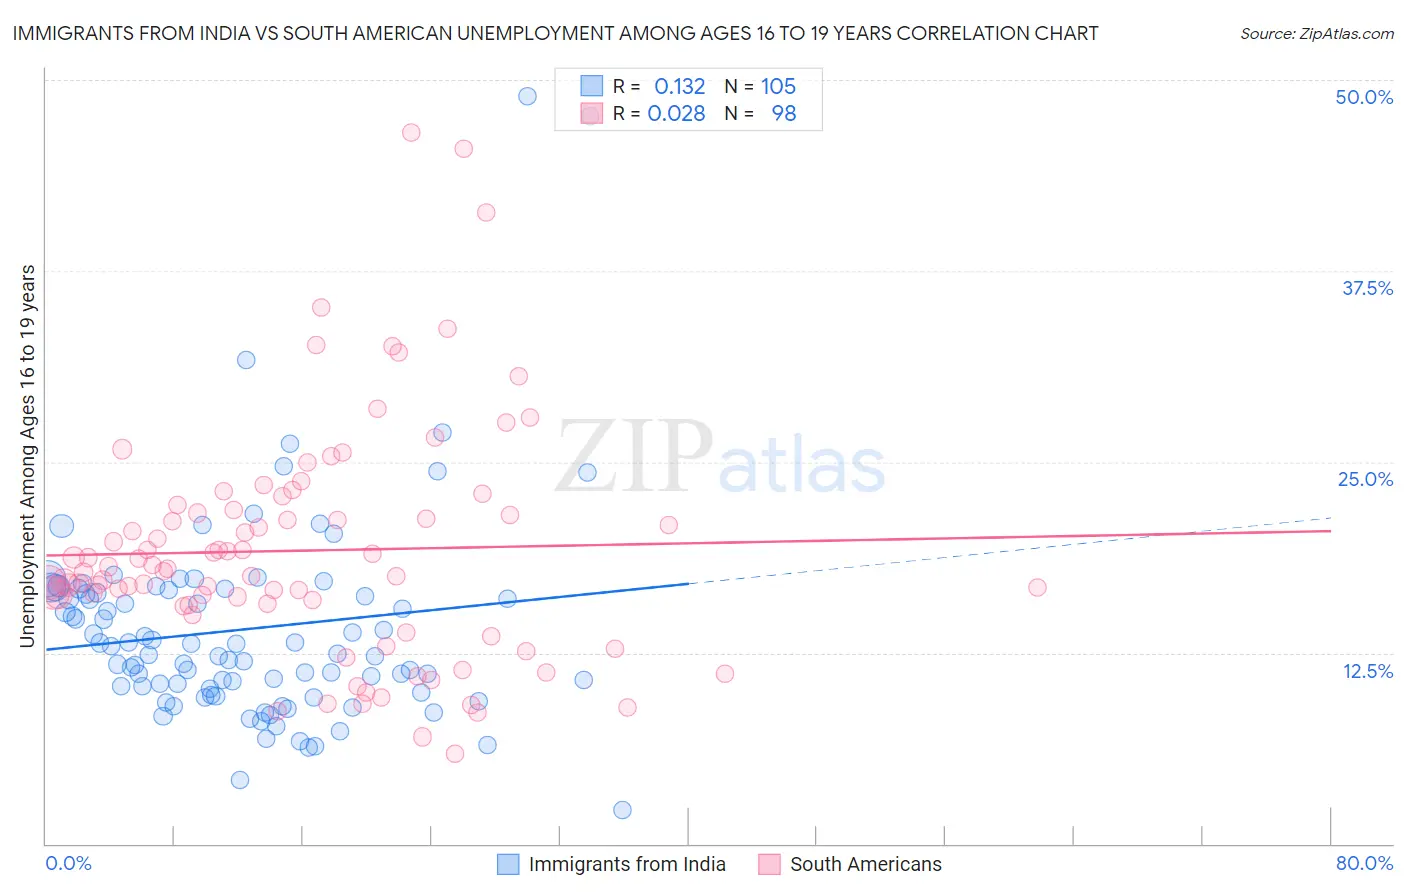 Immigrants from India vs South American Unemployment Among Ages 16 to 19 years